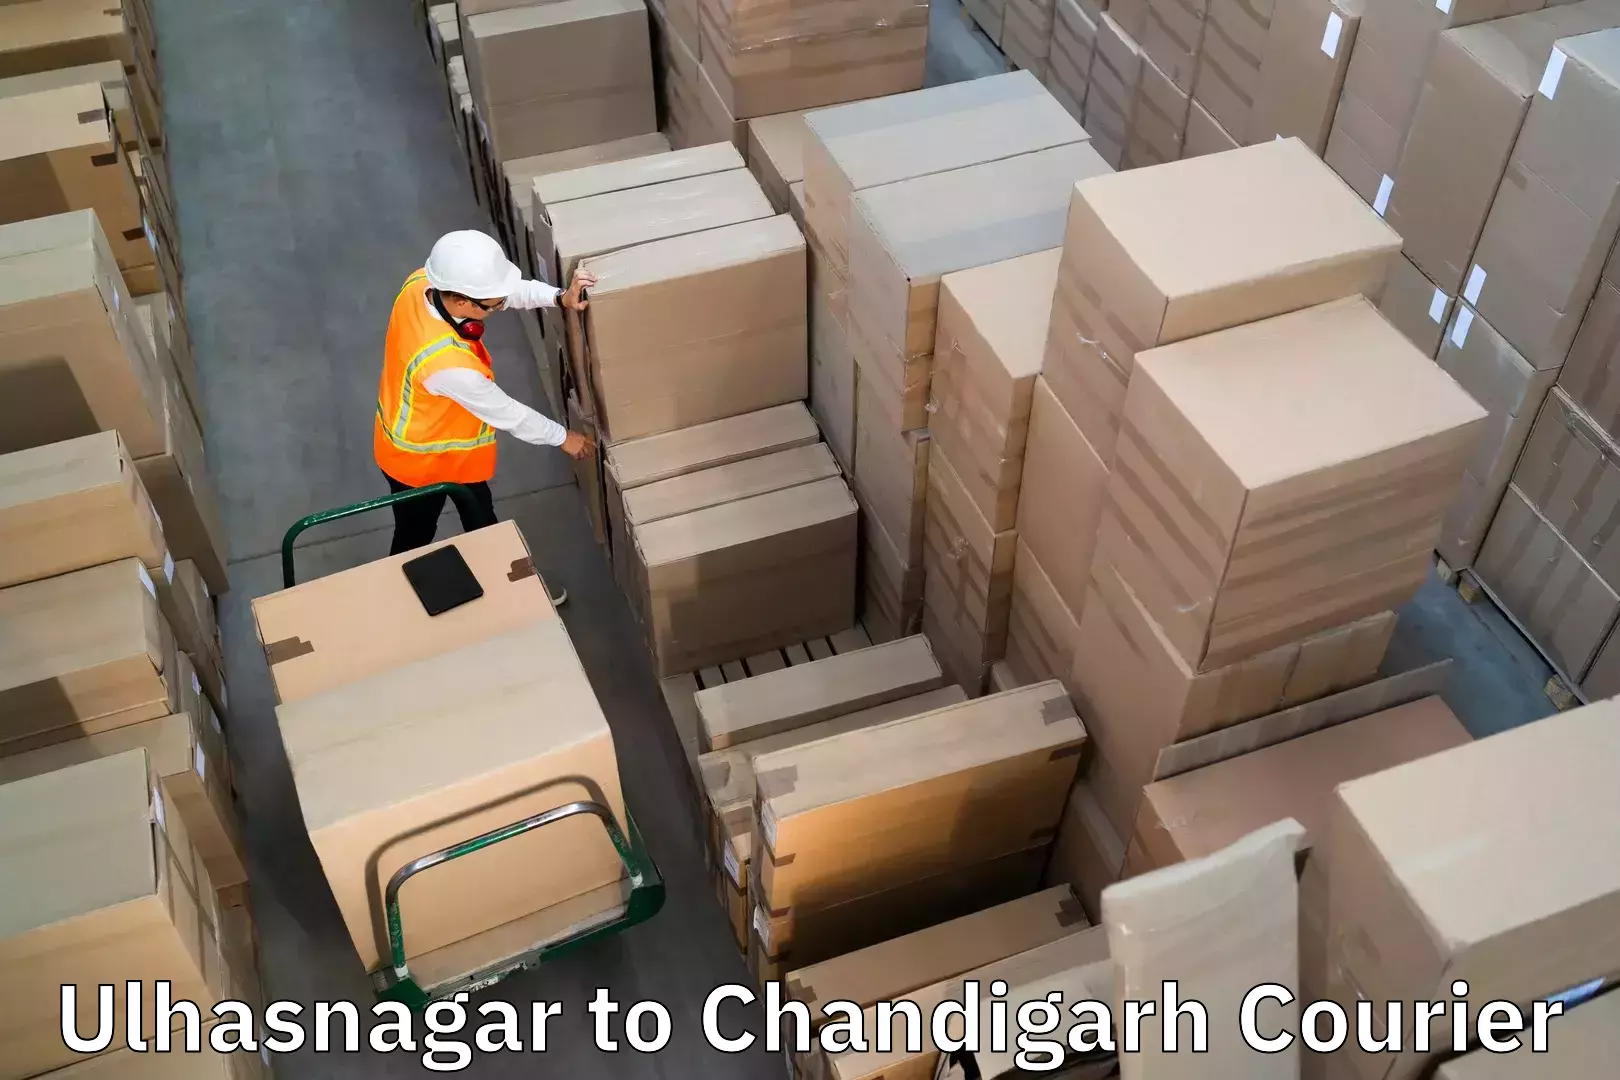 Baggage shipping experience Ulhasnagar to Chandigarh